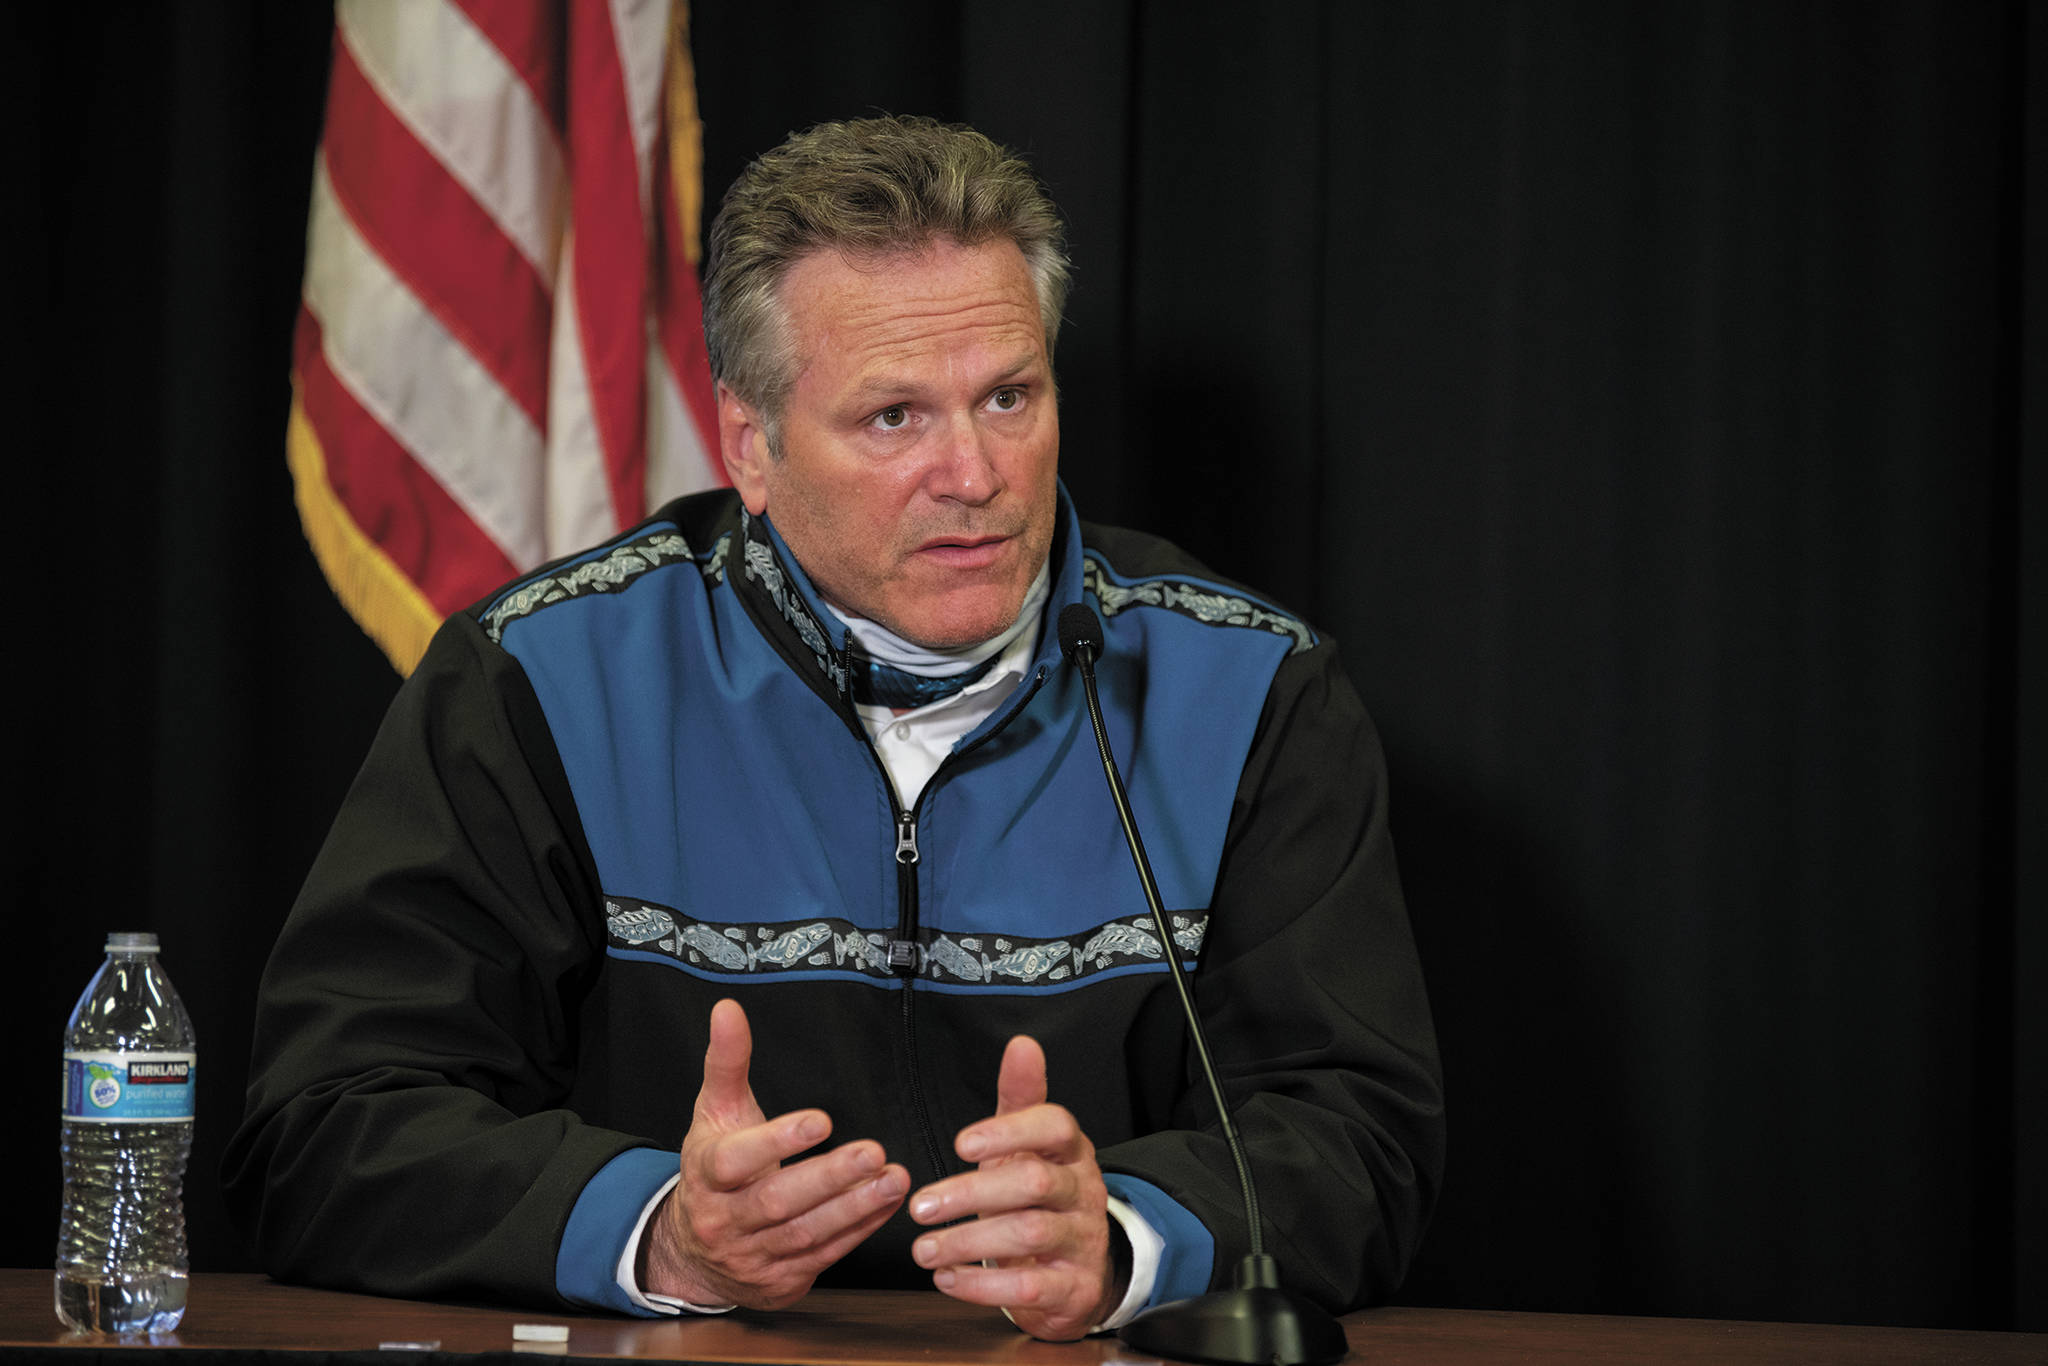 Gov. Mike Dunleavy addresses the public during a virtual town hall on Sept. 15, 2020 in Alaska. ( Courtesy Photo / Austin McDaniel, Office of the Governor)